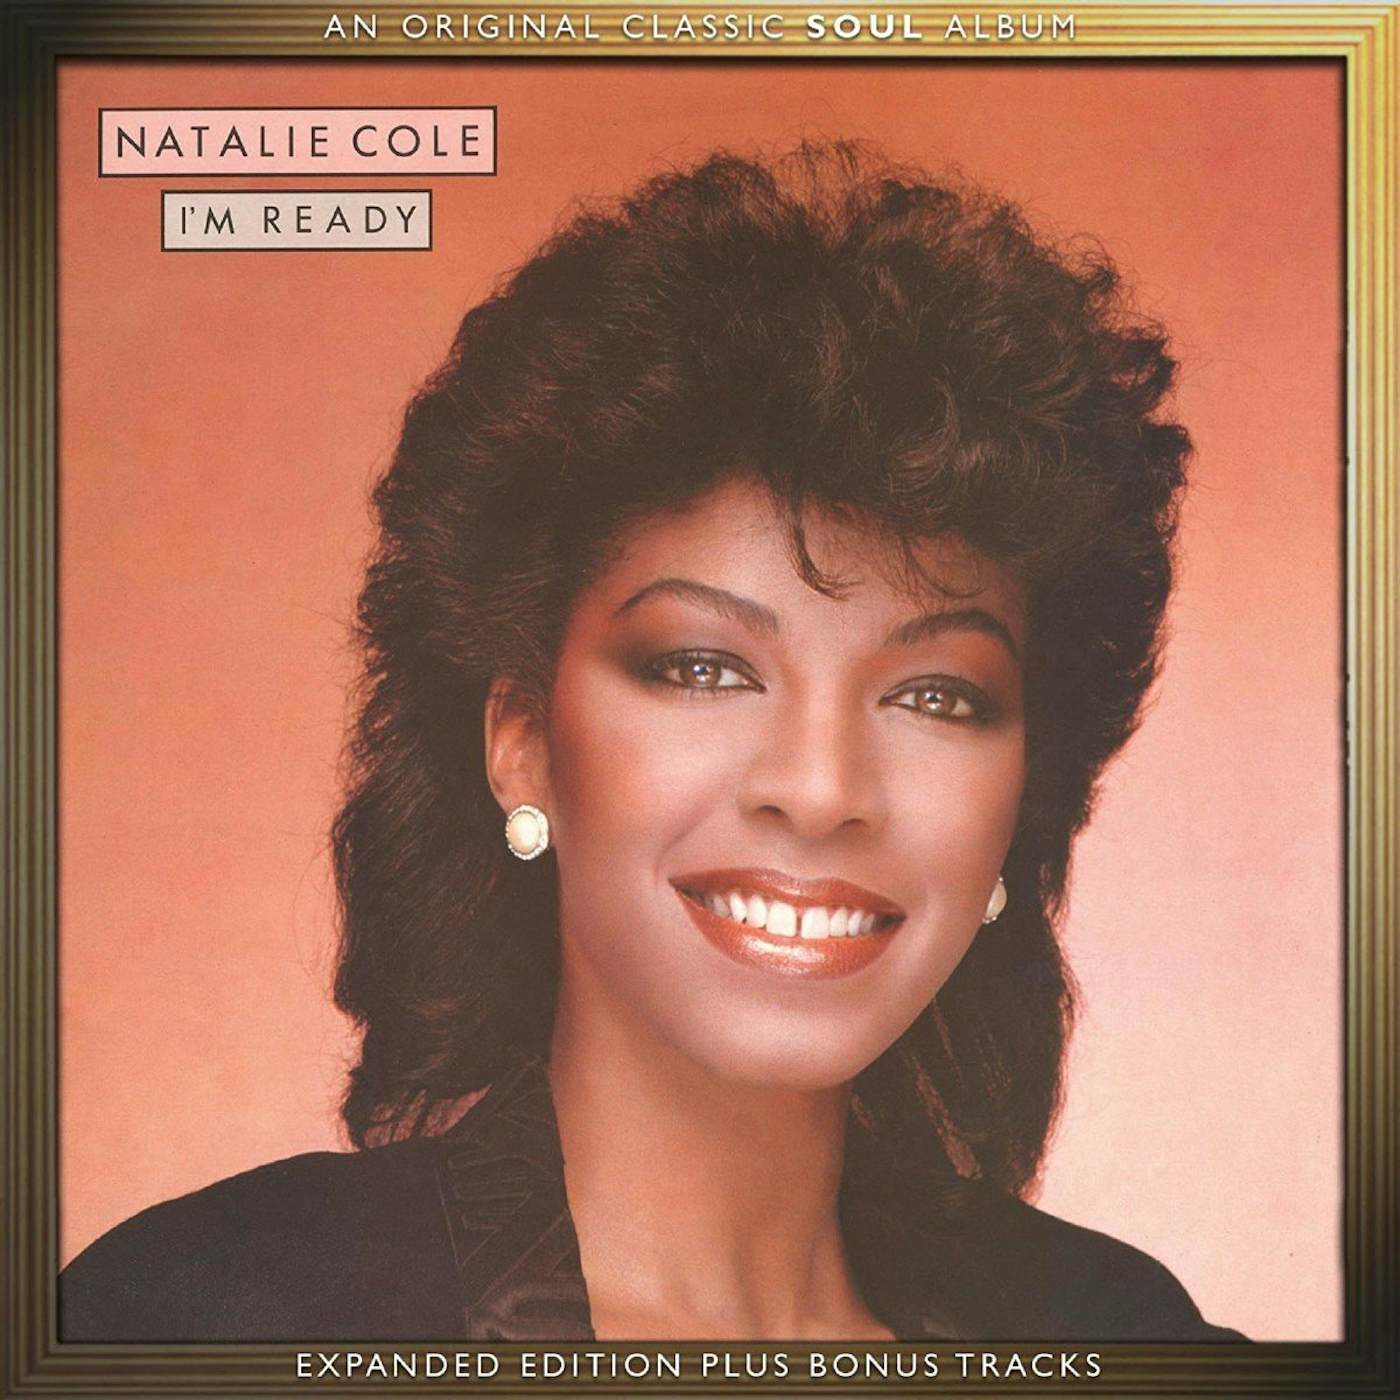 Natalie Cole I'M READY: EXPANDED EDITION CD